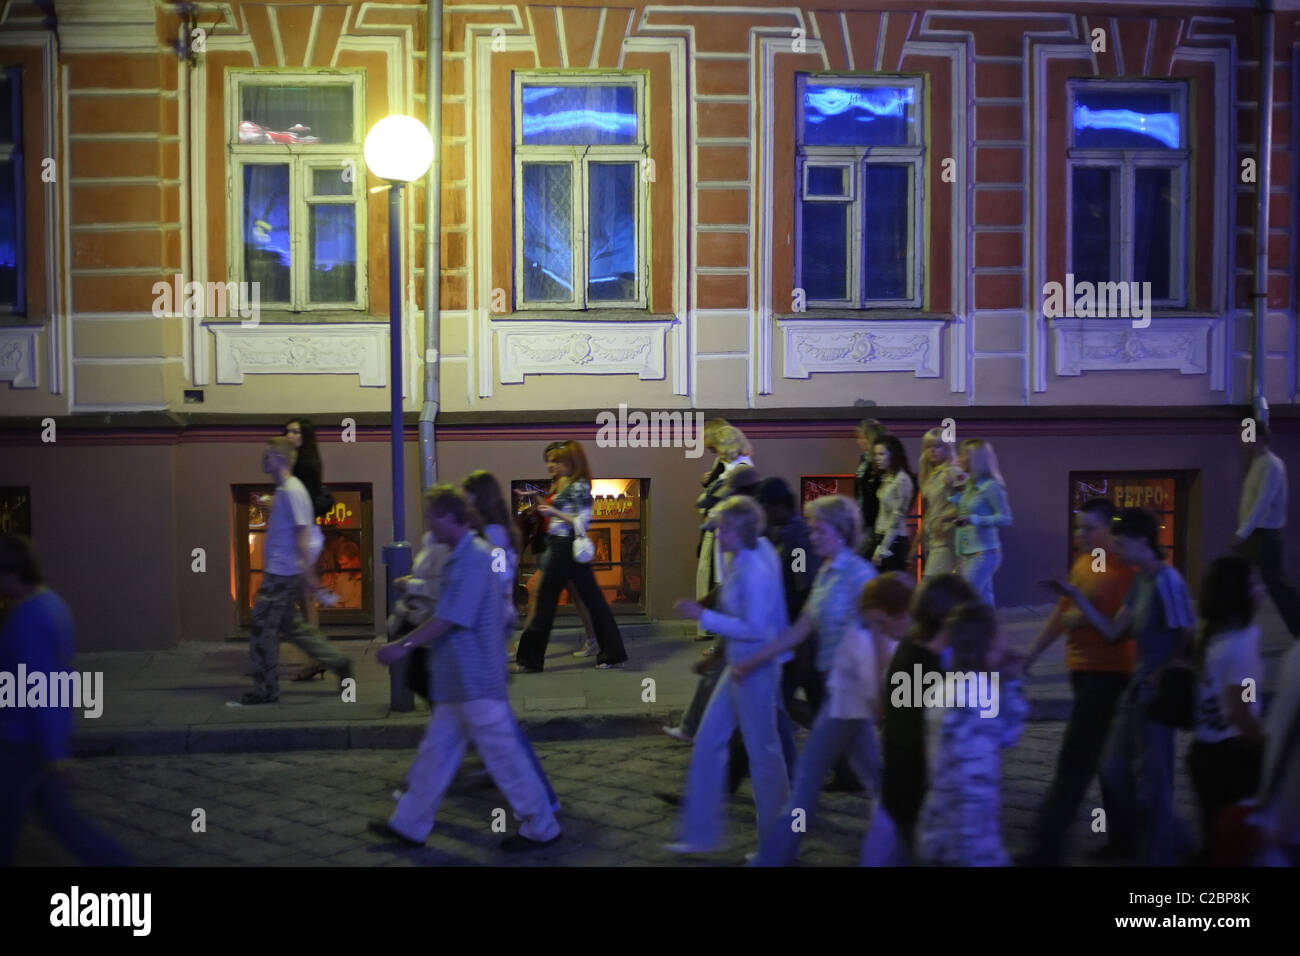 Young people on the way home after an event, Hrodna, Belarus Stock Photo